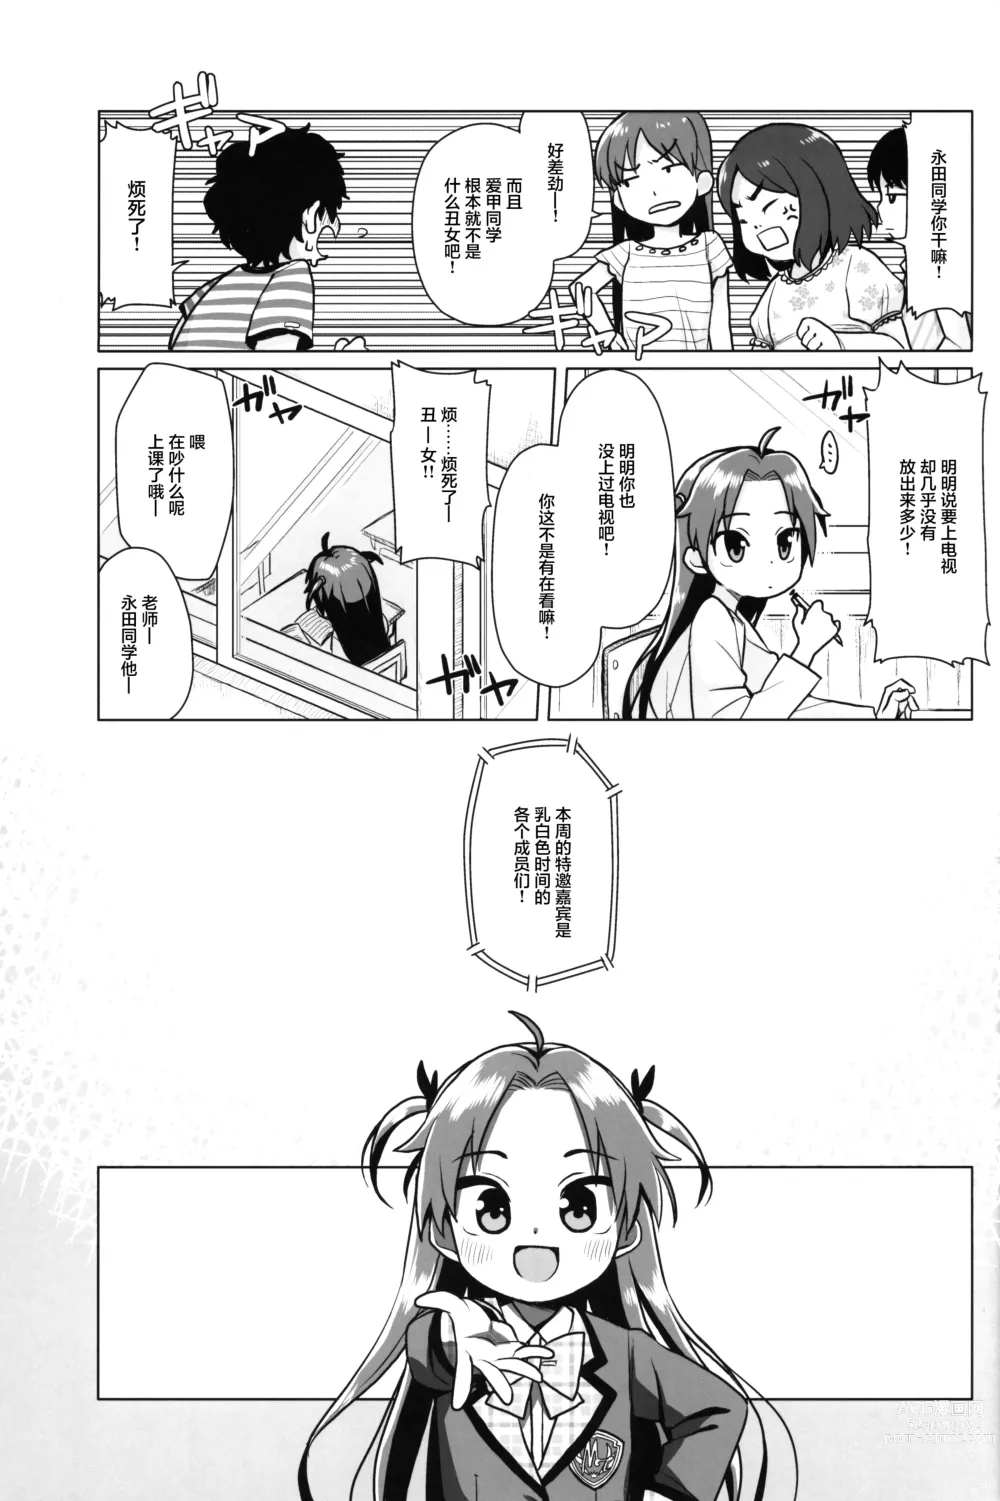 Page 4 of doujinshi 无法如愿的初恋